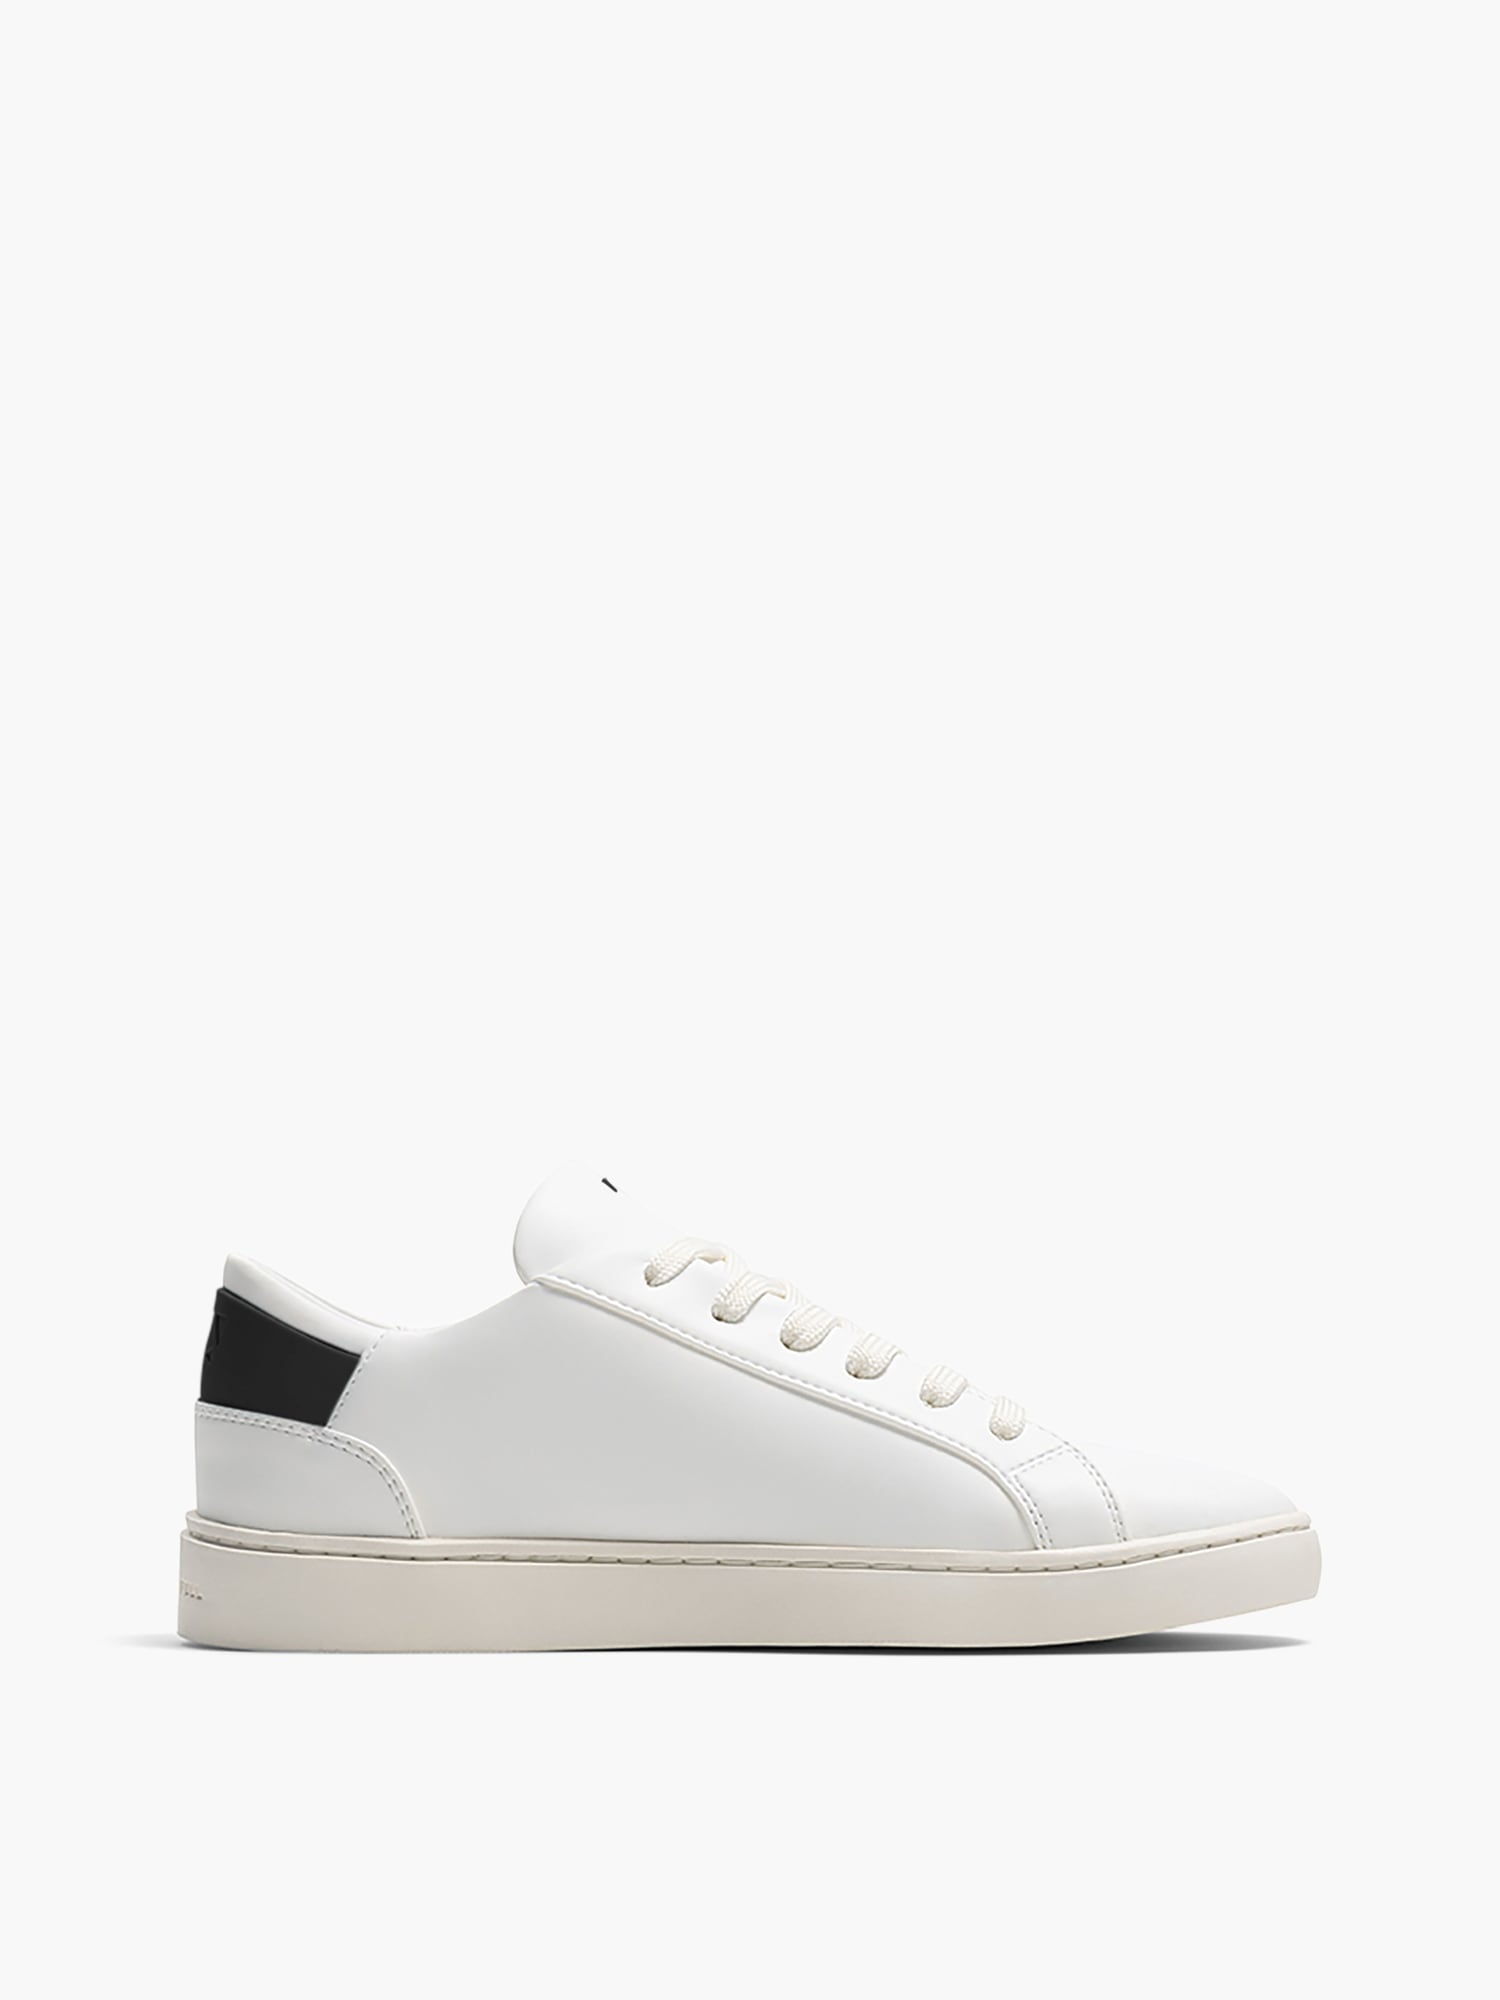 Gap Thousand Fell Womens Lace Up Sneaker white. 1